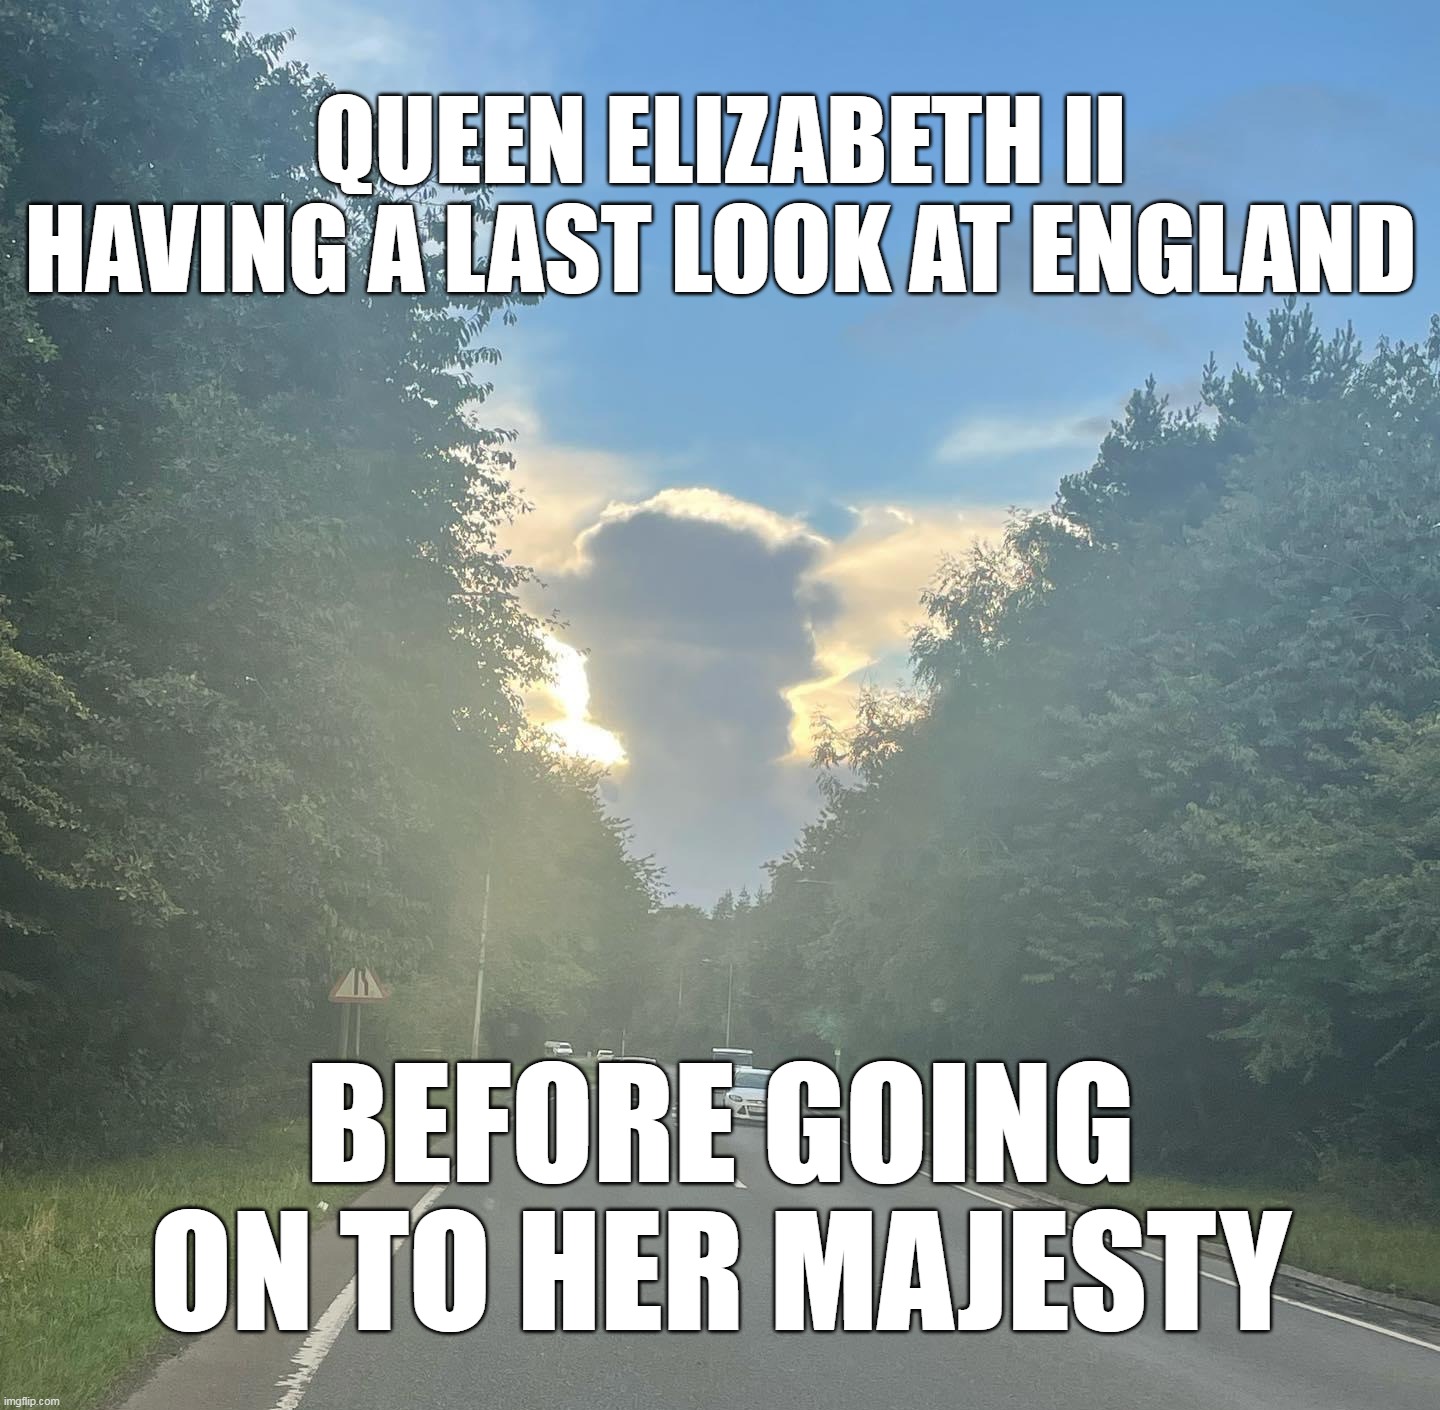 Long Lived the Queen |  QUEEN ELIZABETH II HAVING A LAST LOOK AT ENGLAND; BEFORE GOING ON TO HER MAJESTY | image tagged in meme,memes,queen elizabeth,england,the queen elizabeth ii | made w/ Imgflip meme maker